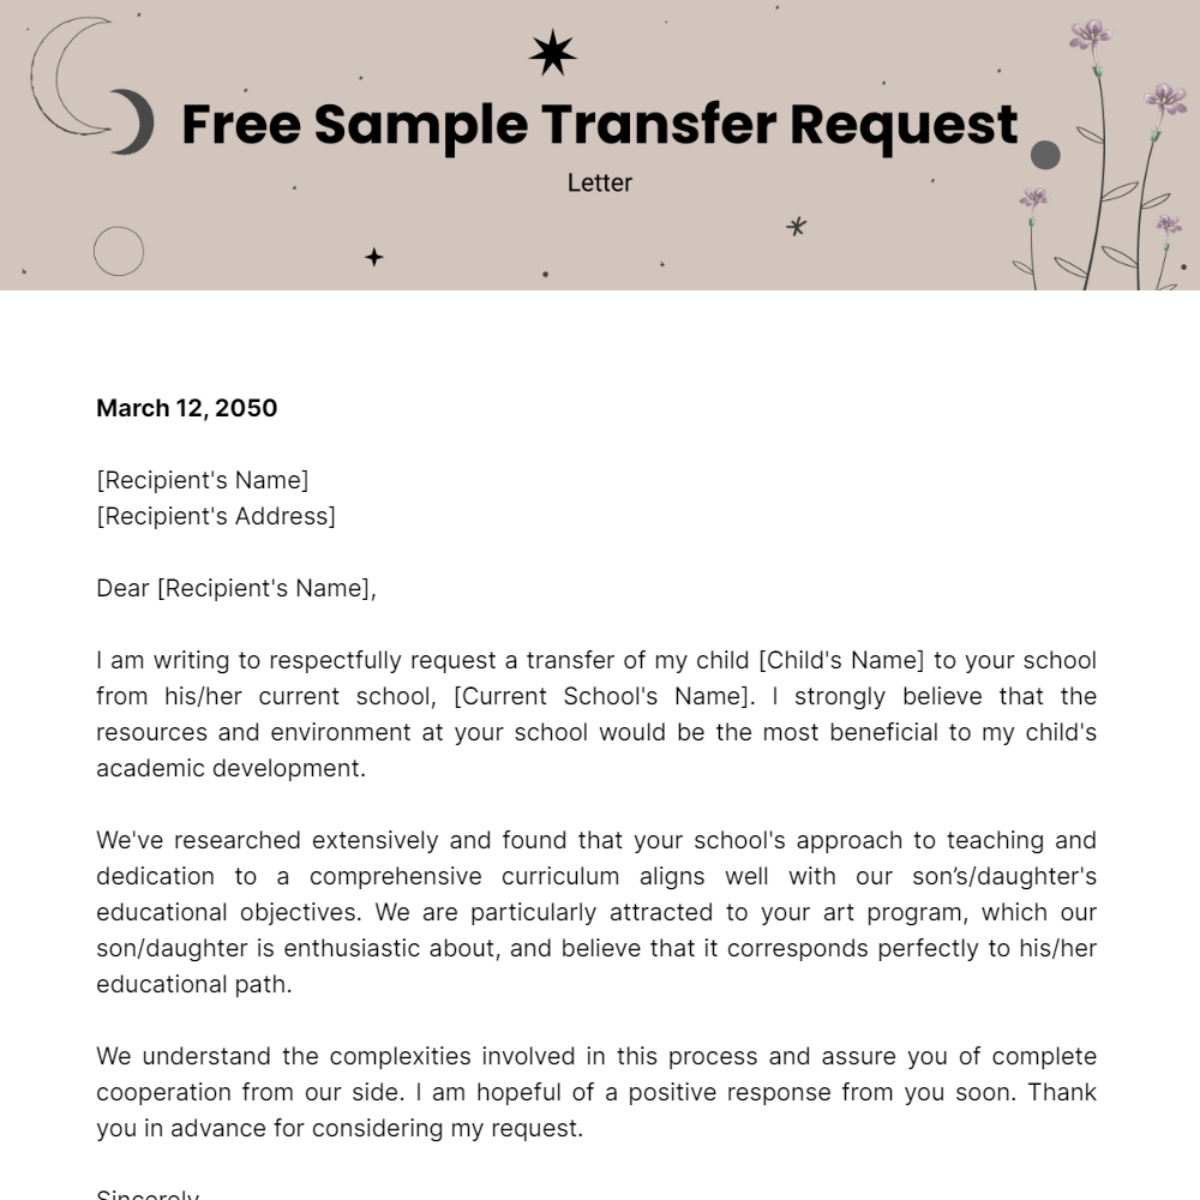 Sample Transfer Request Letter Template